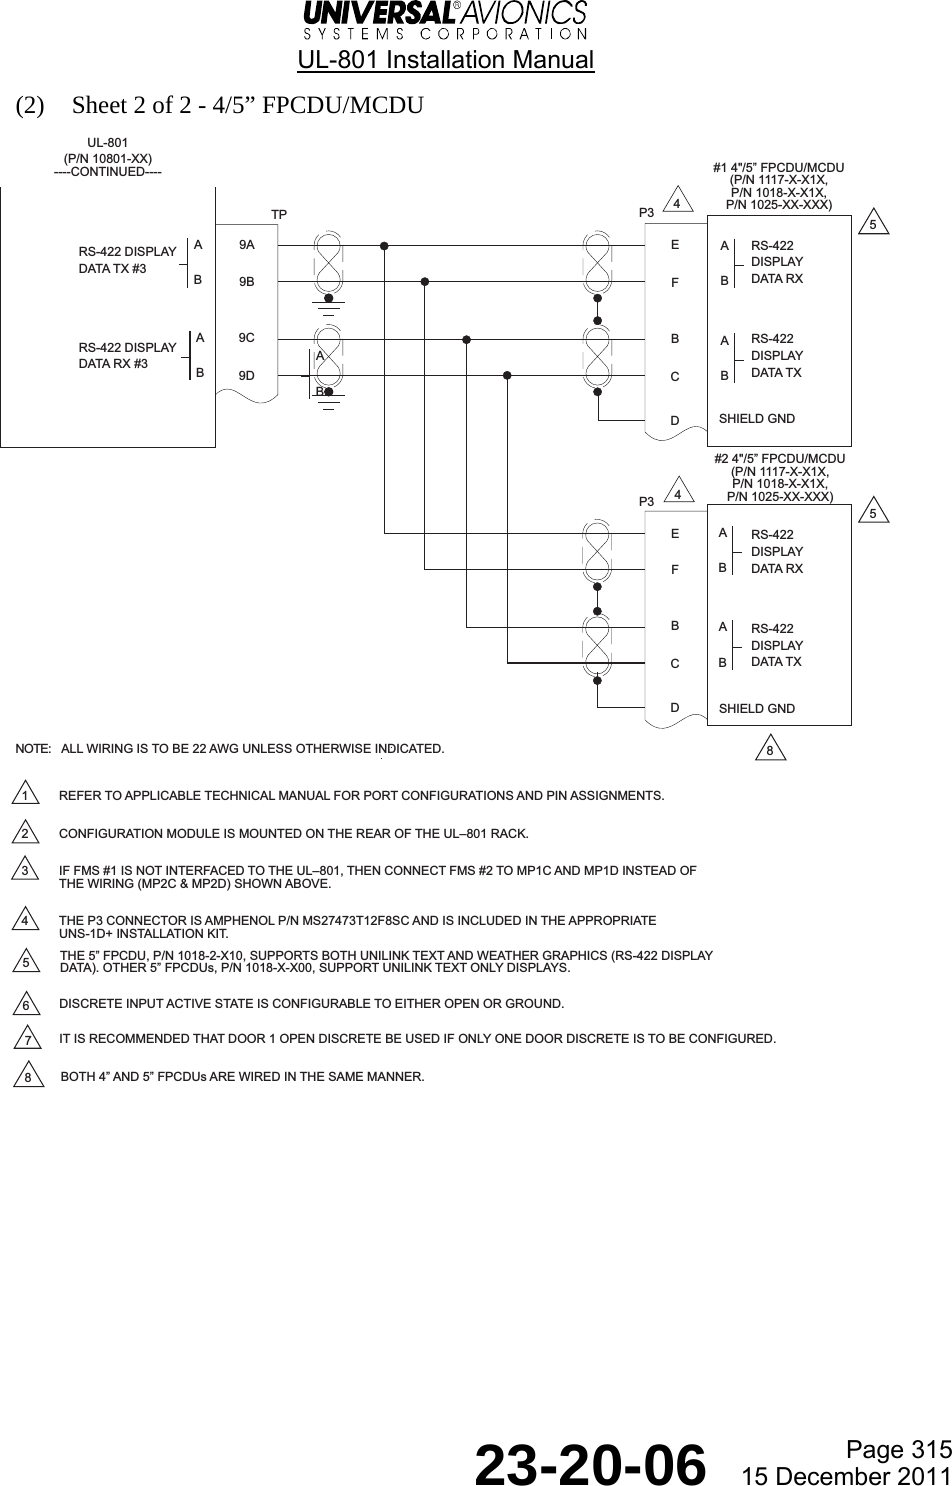  UL-801 Installation Manual  Page 315  23-20-06  15 December 2011 (2) Sheet 2 of 2 - 4/5” FPCDU/MCDU   TP9A9BRS-422 DISPLAYDATA TX #3RS-422DISPLAYDATA RX9C9DRS-422 DISPLAYDATA RX #3RS-422DISPLAYDATA TXP3RS-422DISPLAYDATA RXRS-422DISPLAYDATA TXP3EFBCDEFBCDSHIELD GNDSHIELD GND5544UL-801(P/N 10801-XX)----CONTINUED----1 REFER TO APPLICABLE TECHNICAL MANUAL FOR PORT CONFIGURATIONS AND PIN ASSIGNMENTS.2 CONFIGURATION MODULE IS MOUNTED ON THE REAR OF THE UL801 RACK.3 IF FMS #1 IS NOT INTERFACED TO THE UL801, THEN CONNECT FMS #2 TO MP1C AND MP1D INSTEAD OFTHE WIRING (MP2C &amp; MP2D) SHOWN ABOVE.4 THE P3 CONNECTOR IS AMPHENOL P/N MS27473T12F8SC AND IS INCLUDED IN THE APPROPRIATEUNS-1D+ INSTALLATION KIT.DISCRETE INPUT ACTIVE STATE IS CONFIGURABLE TO EITHER OPEN OR GROUND.IT IS RECOMMENDED THAT DOOR 1 OPEN DISCRETE BE USED IF ONLY ONE DOOR DISCRETE IS TO BE CONFIGURED.67ALL WIRING IS TO BE 22 AWG UNLESS OTHERWISE INDICATED.NOTE:5THE 5 FPCDU, P/N 1018-2-X10, SUPPORTS BOTH UNILINK TEXT AND WEATHER GRAPHICS (RS-422 DISPLAYDATA). OTHER 5 FPCDUs, P/N 1018-X-X00, SUPPORT UNILINK TEXT ONLY DISPLAYS.8BOTH 4 AND 5 FPCDUs ARE WIRED IN THE SAME MANNER.8#1 4&quot;/5 FPCDU/MCDU(P/N 1117-X-X1X,P/N 1018-X-X1X,P/N 1025-XX-XXX)#2 4&quot;/5 FPCDU/MCDU(P/N 1117-X-X1X,P/N 1018-X-X1X,P/N 1025-XX-XXX)ABABABABABABAB